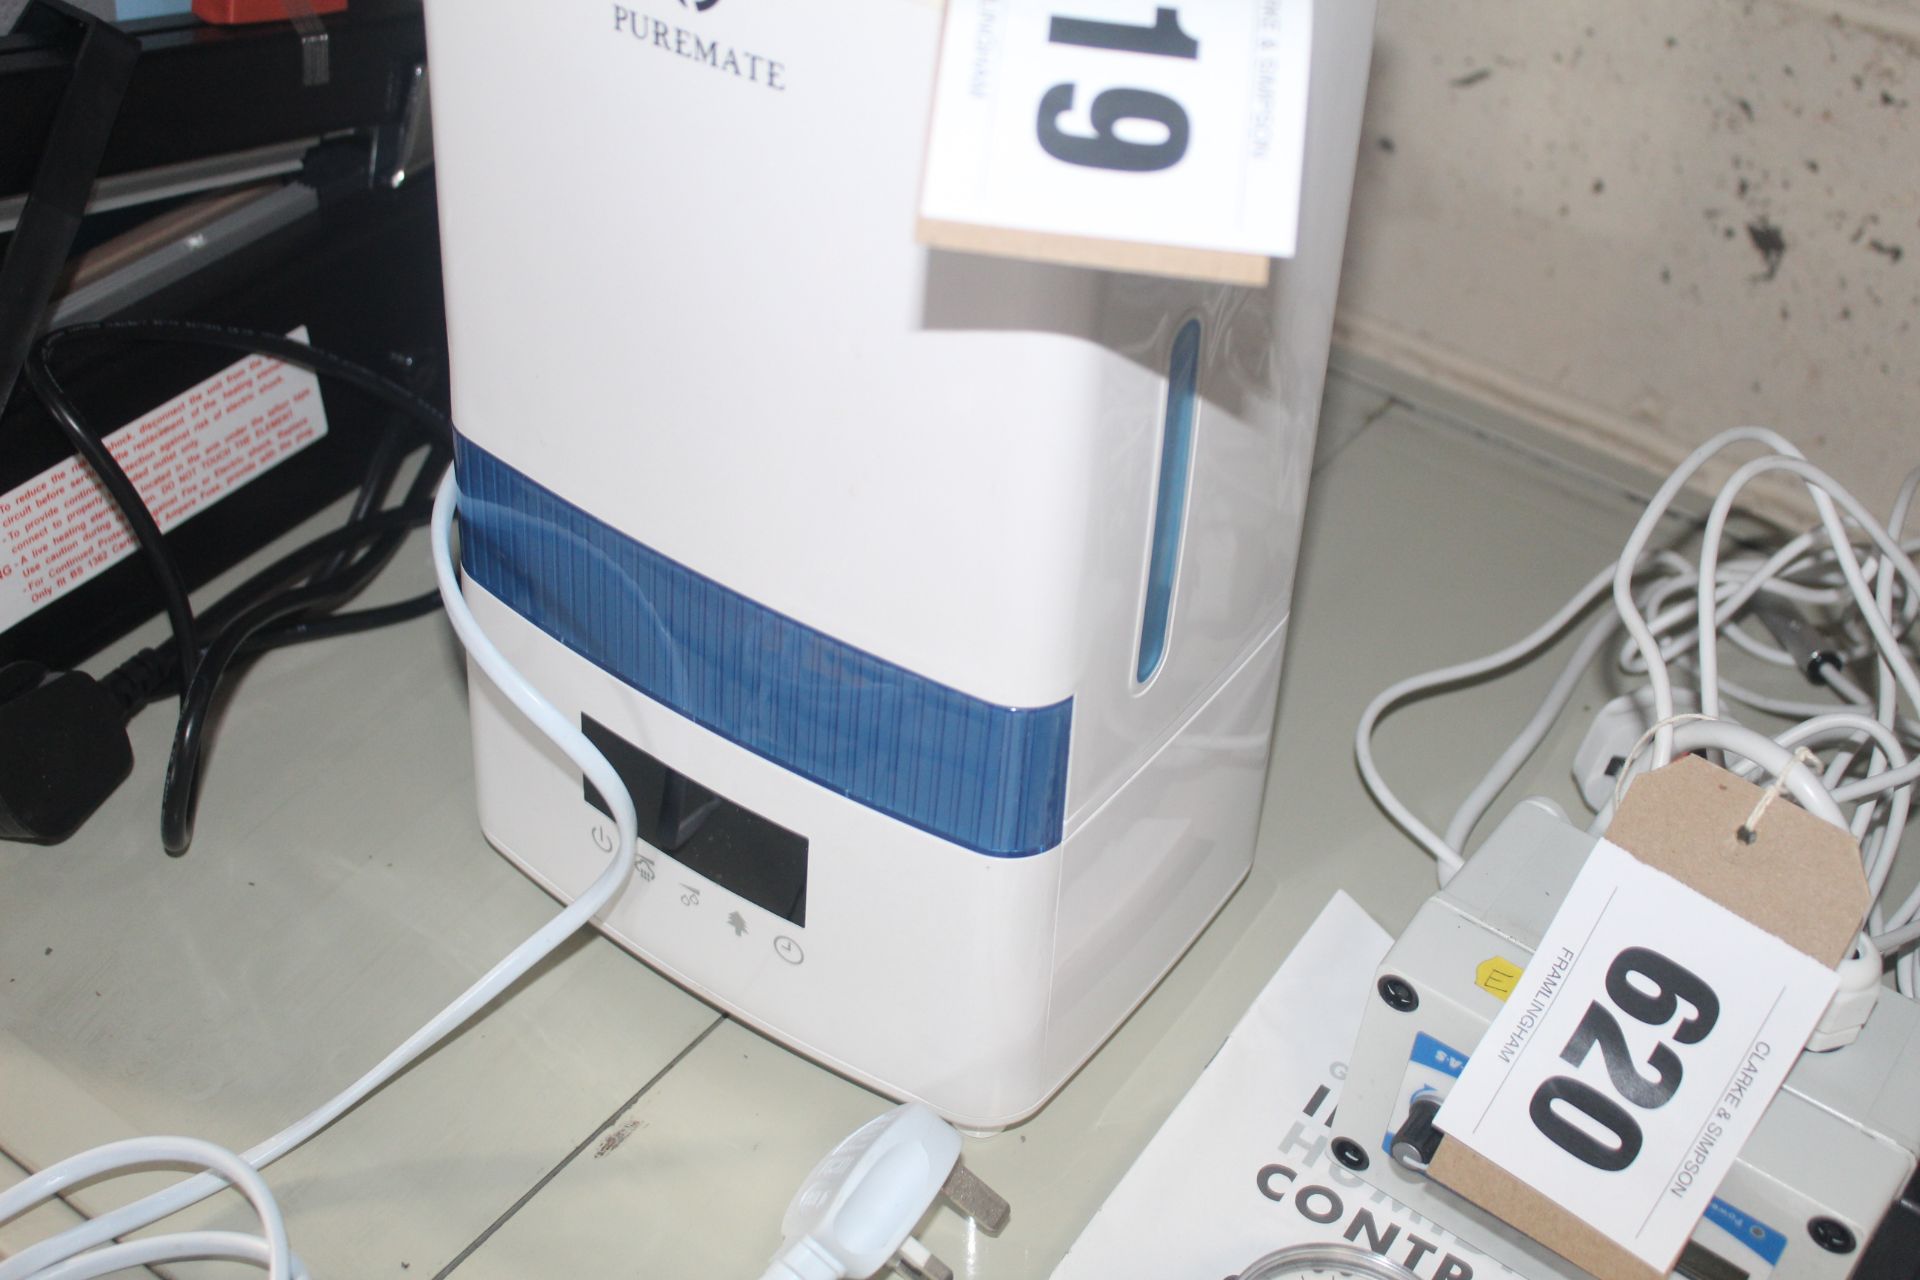 Puremate humidifier. V - Image 2 of 2